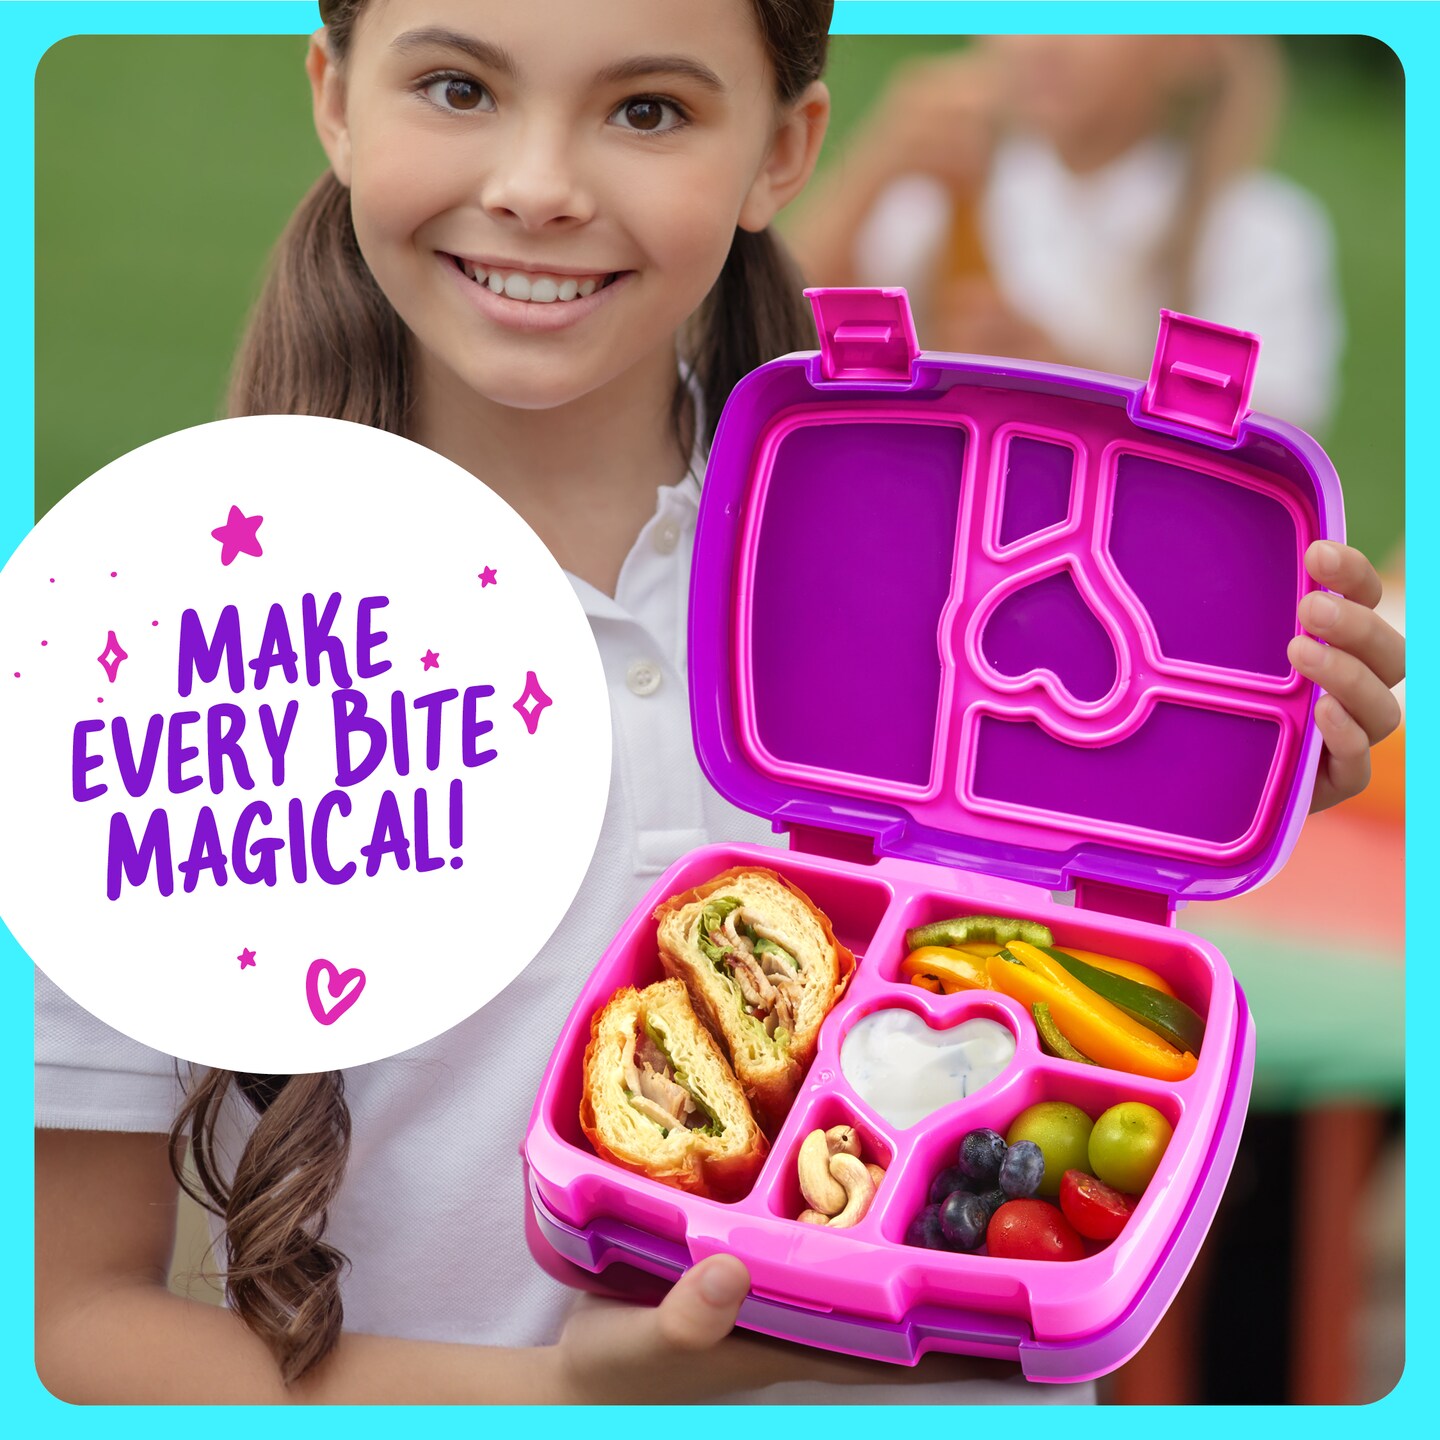 Pretty Me Unicorn Bento Box for Kids - Lunch Box for Girls - School Snack - Gifts for Girl 3-8 Year Old - Containers, Boxes, Christmas Gift,